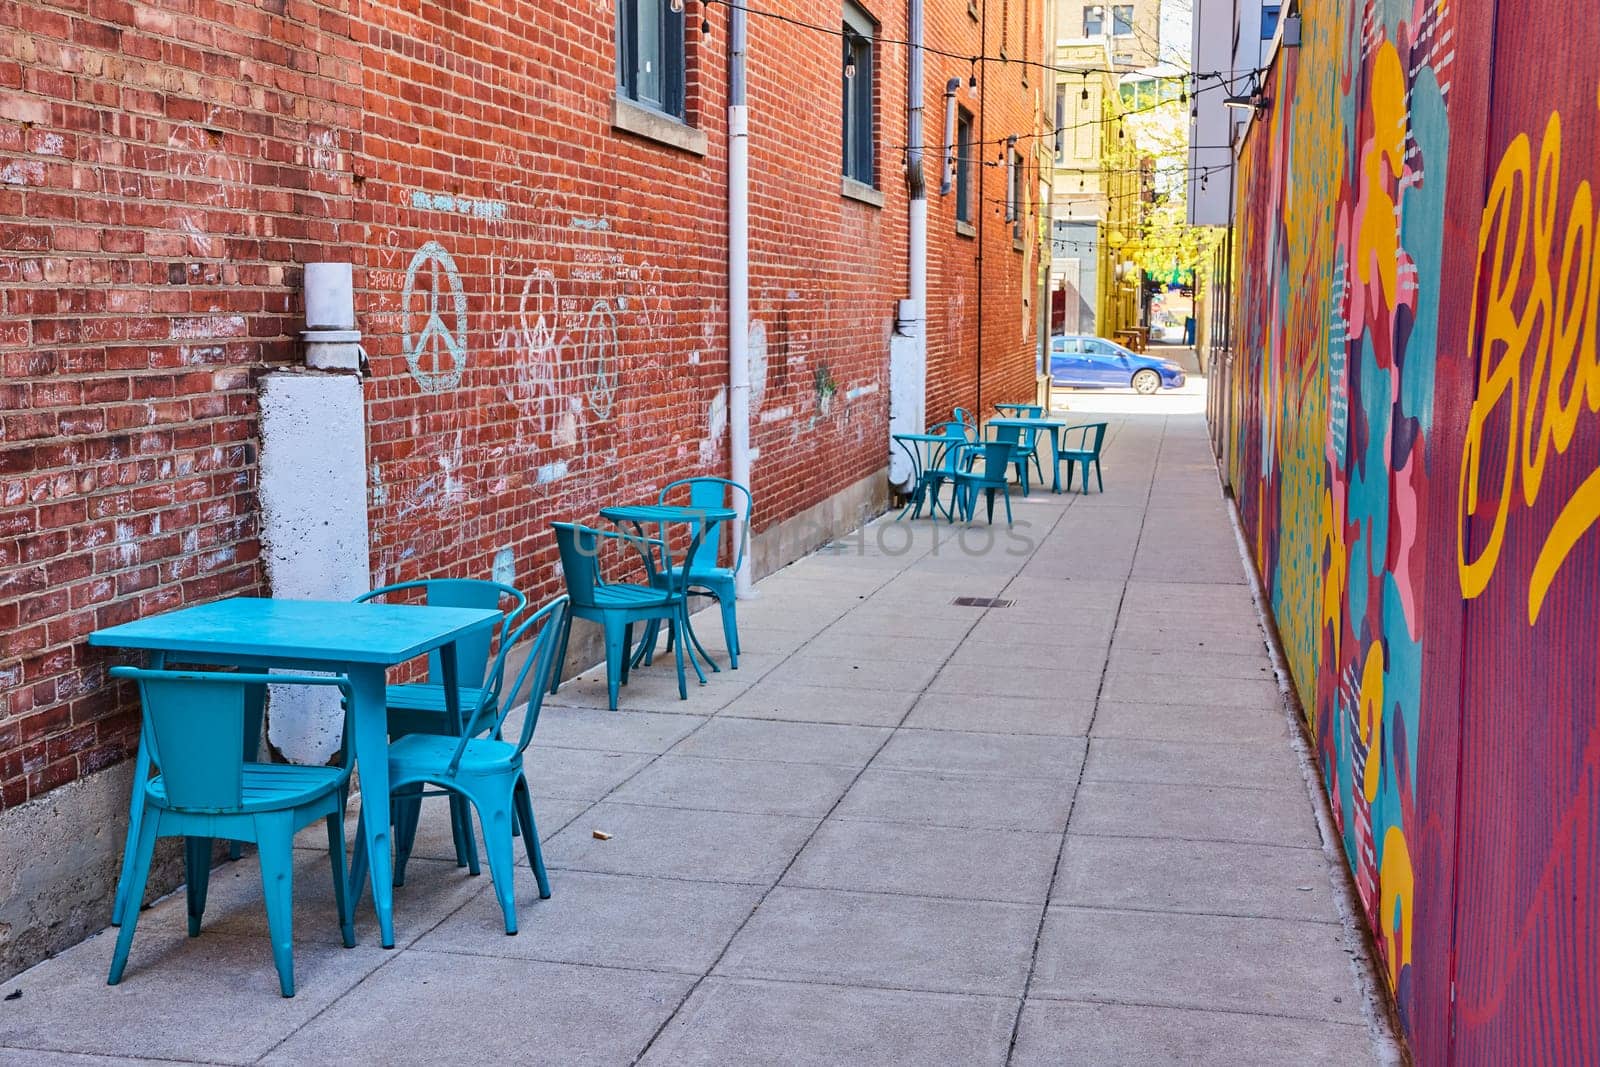 Vibrant alley in downtown Fort Wayne with colorful mural and turquoise cafe seating, showcasing urban renewal.